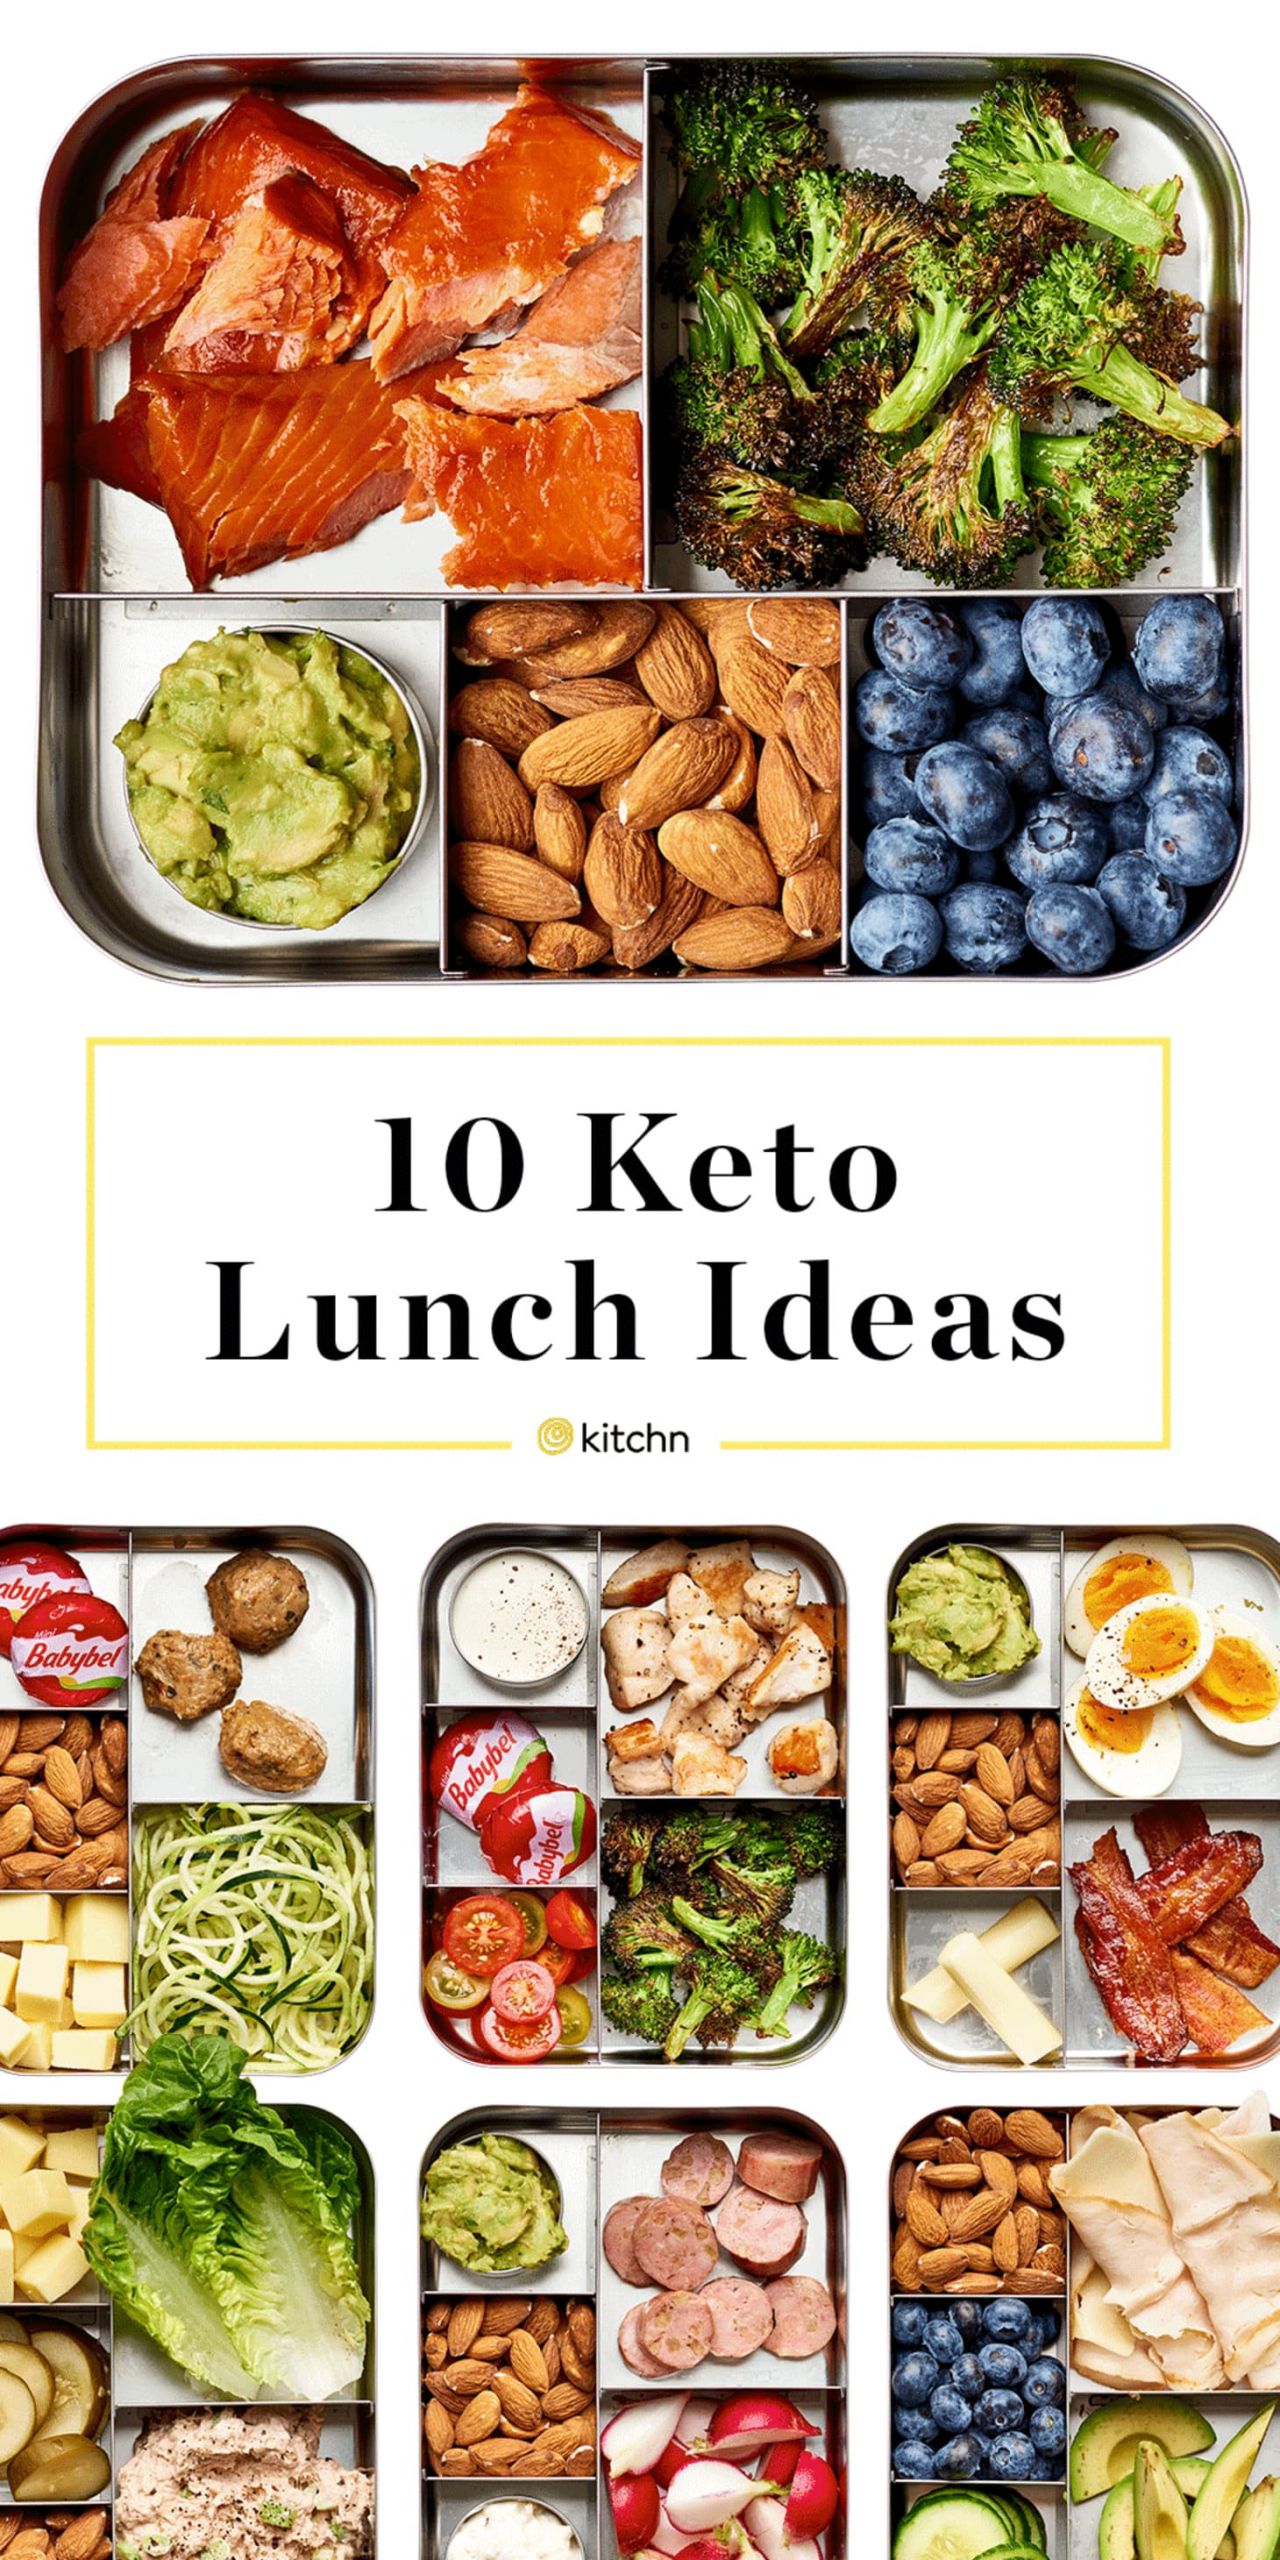 Easy Keto Lunch Ideas
 10 Easy Keto Lunch Ideas with Net Carb Counts